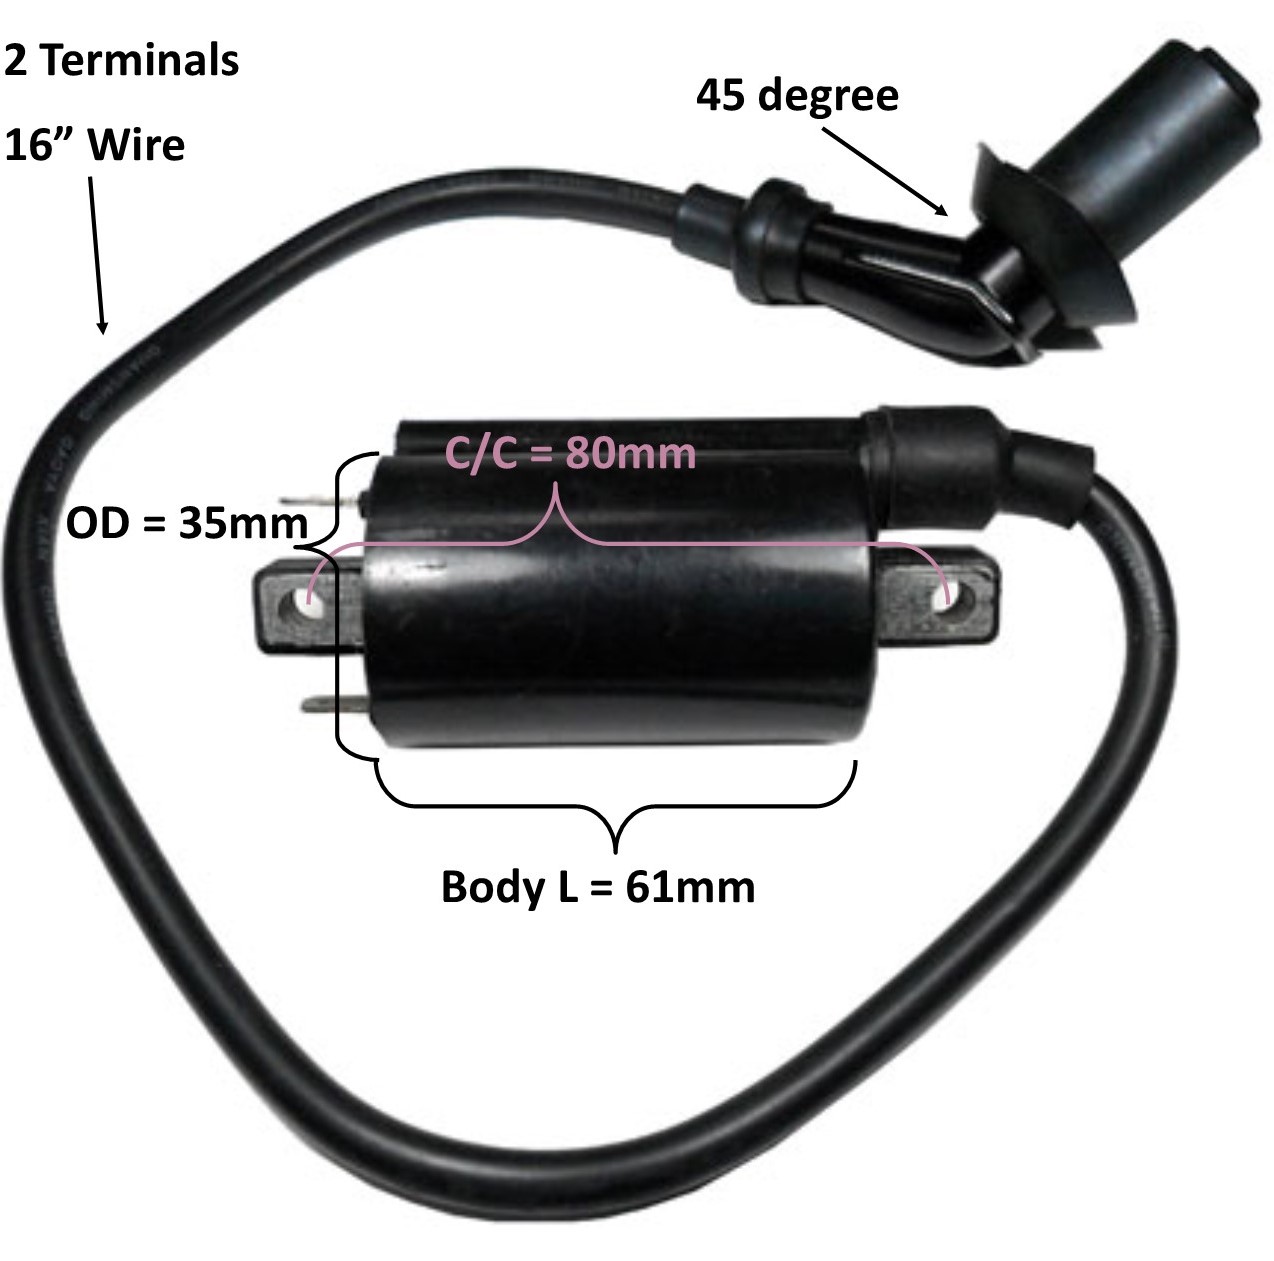 Ignition Coil Plug Cap=45deg 16", 2 Terminals Fits Linhai 260-300, Buyang 300, YP250 + Many Others